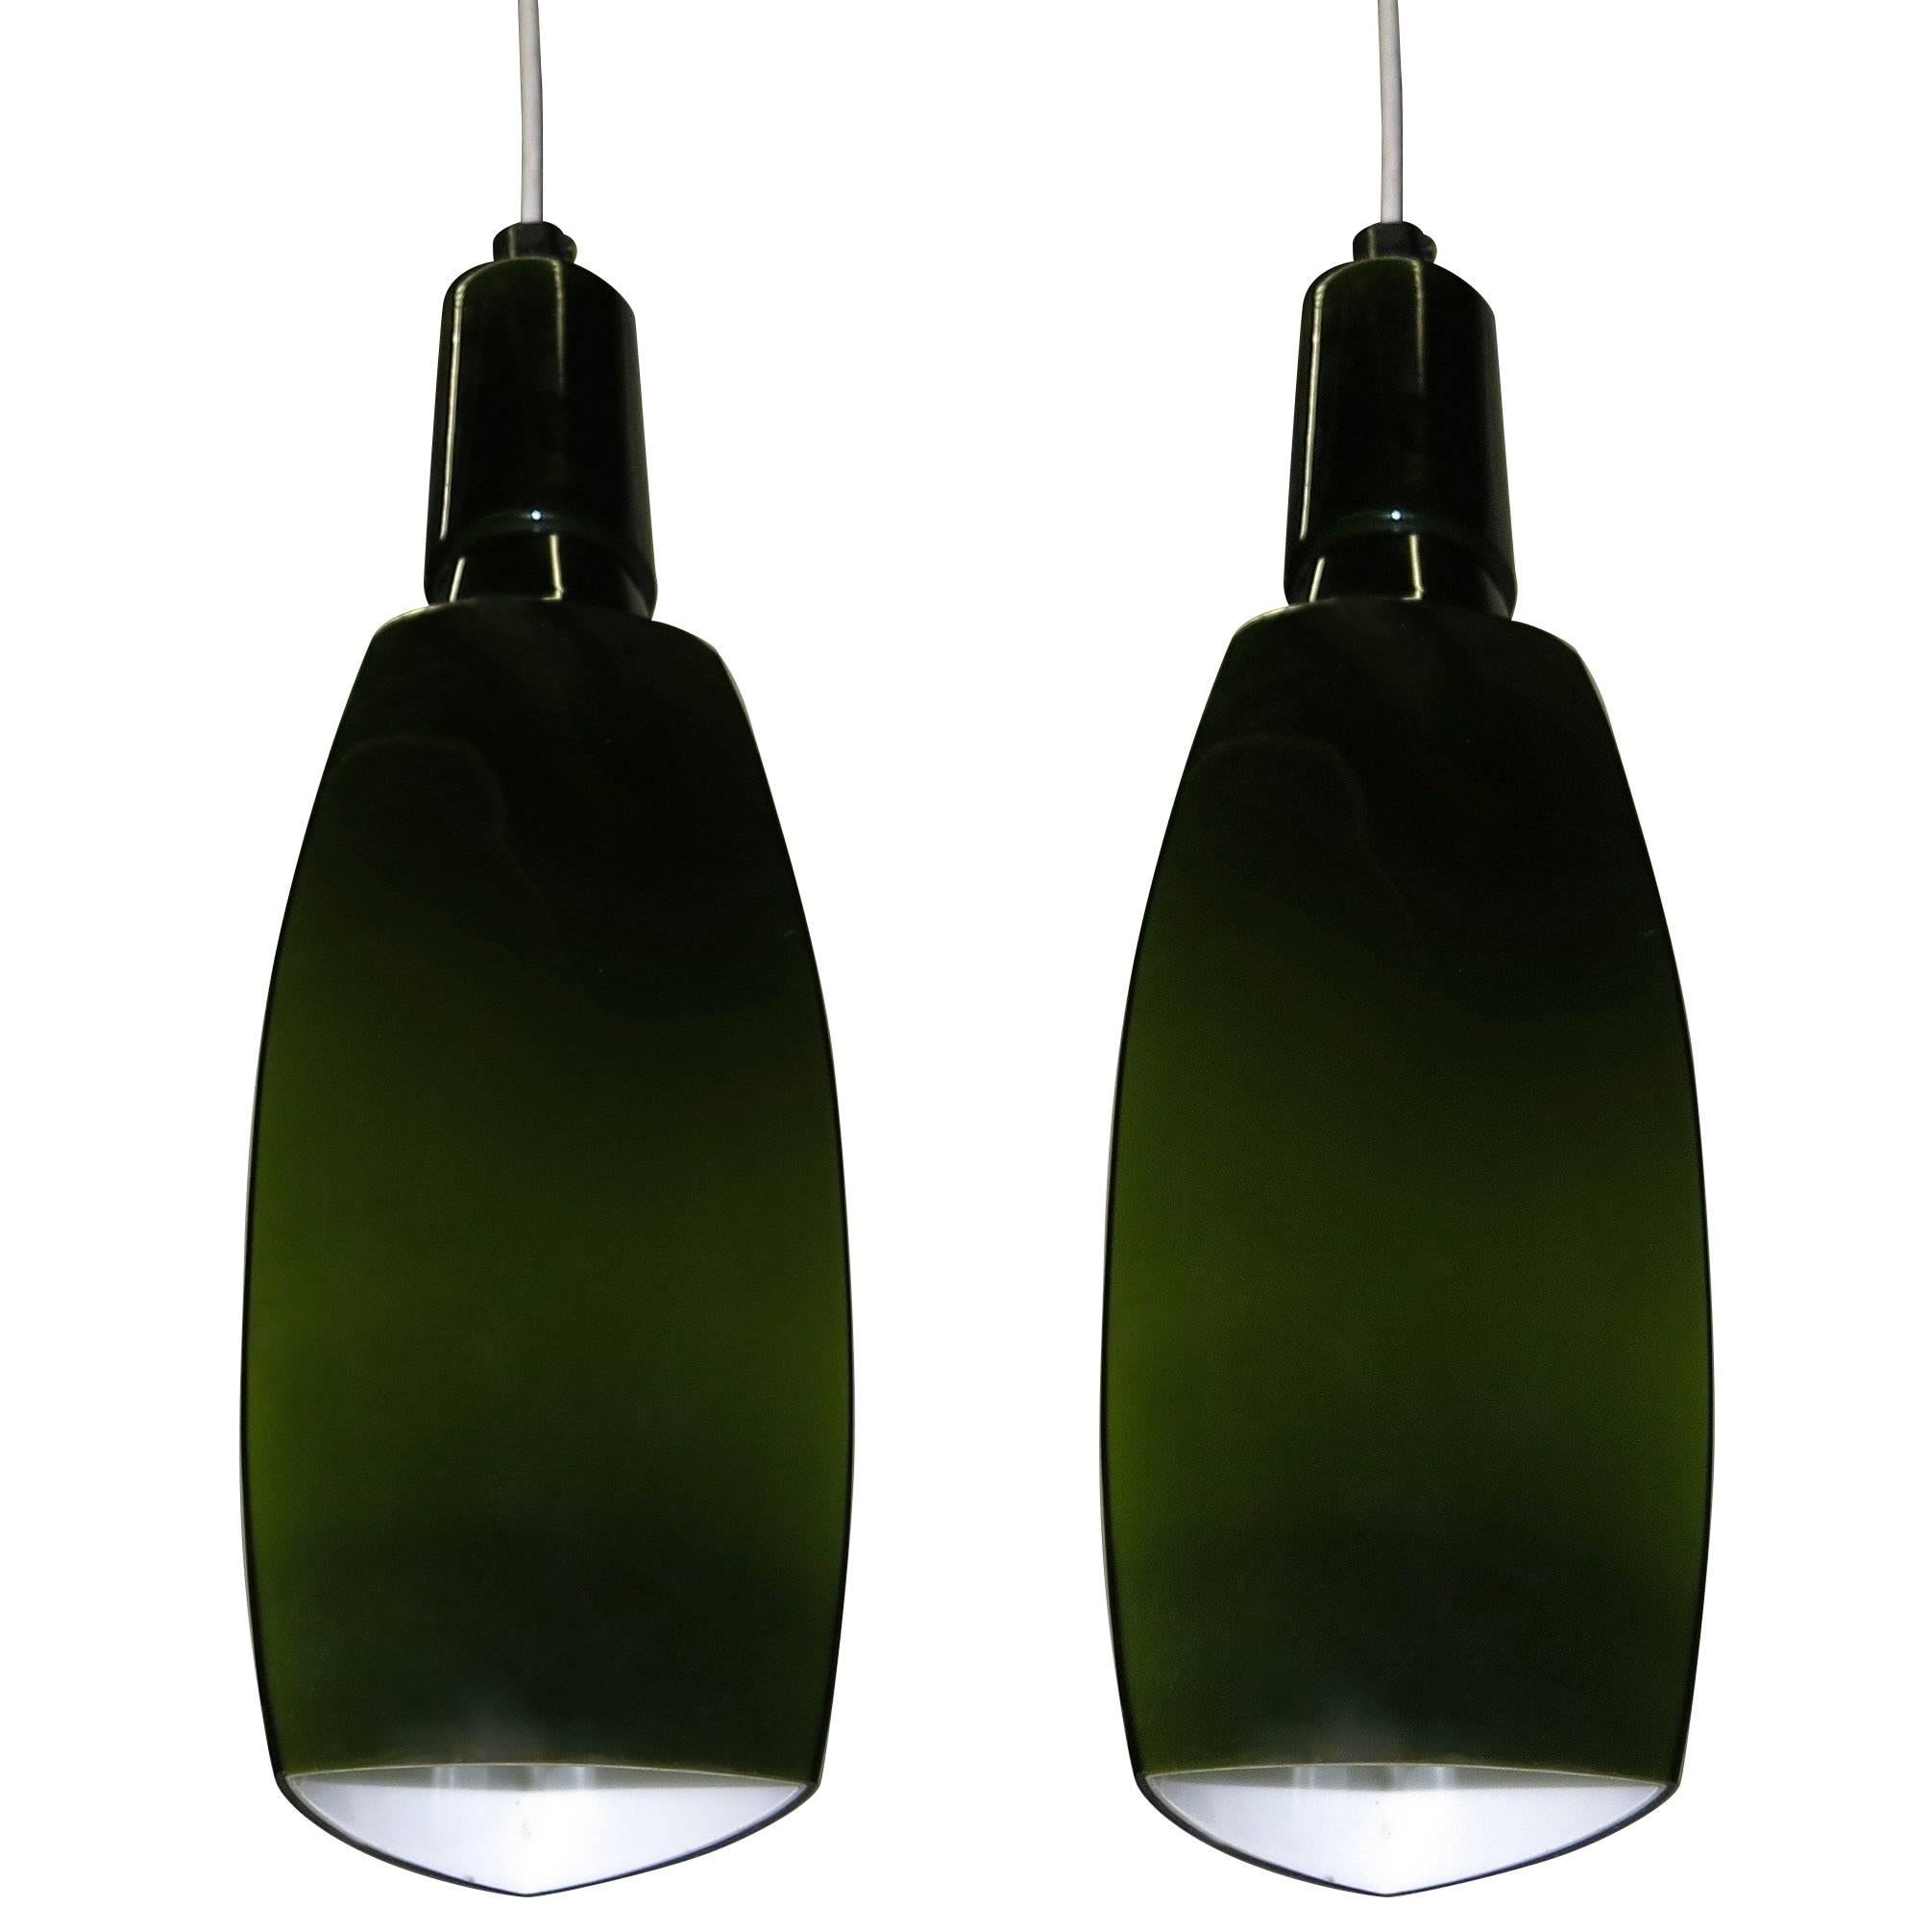 Pair of Green Cased Glass Ceiling Lights by Stilnovo, Italy, 1960s